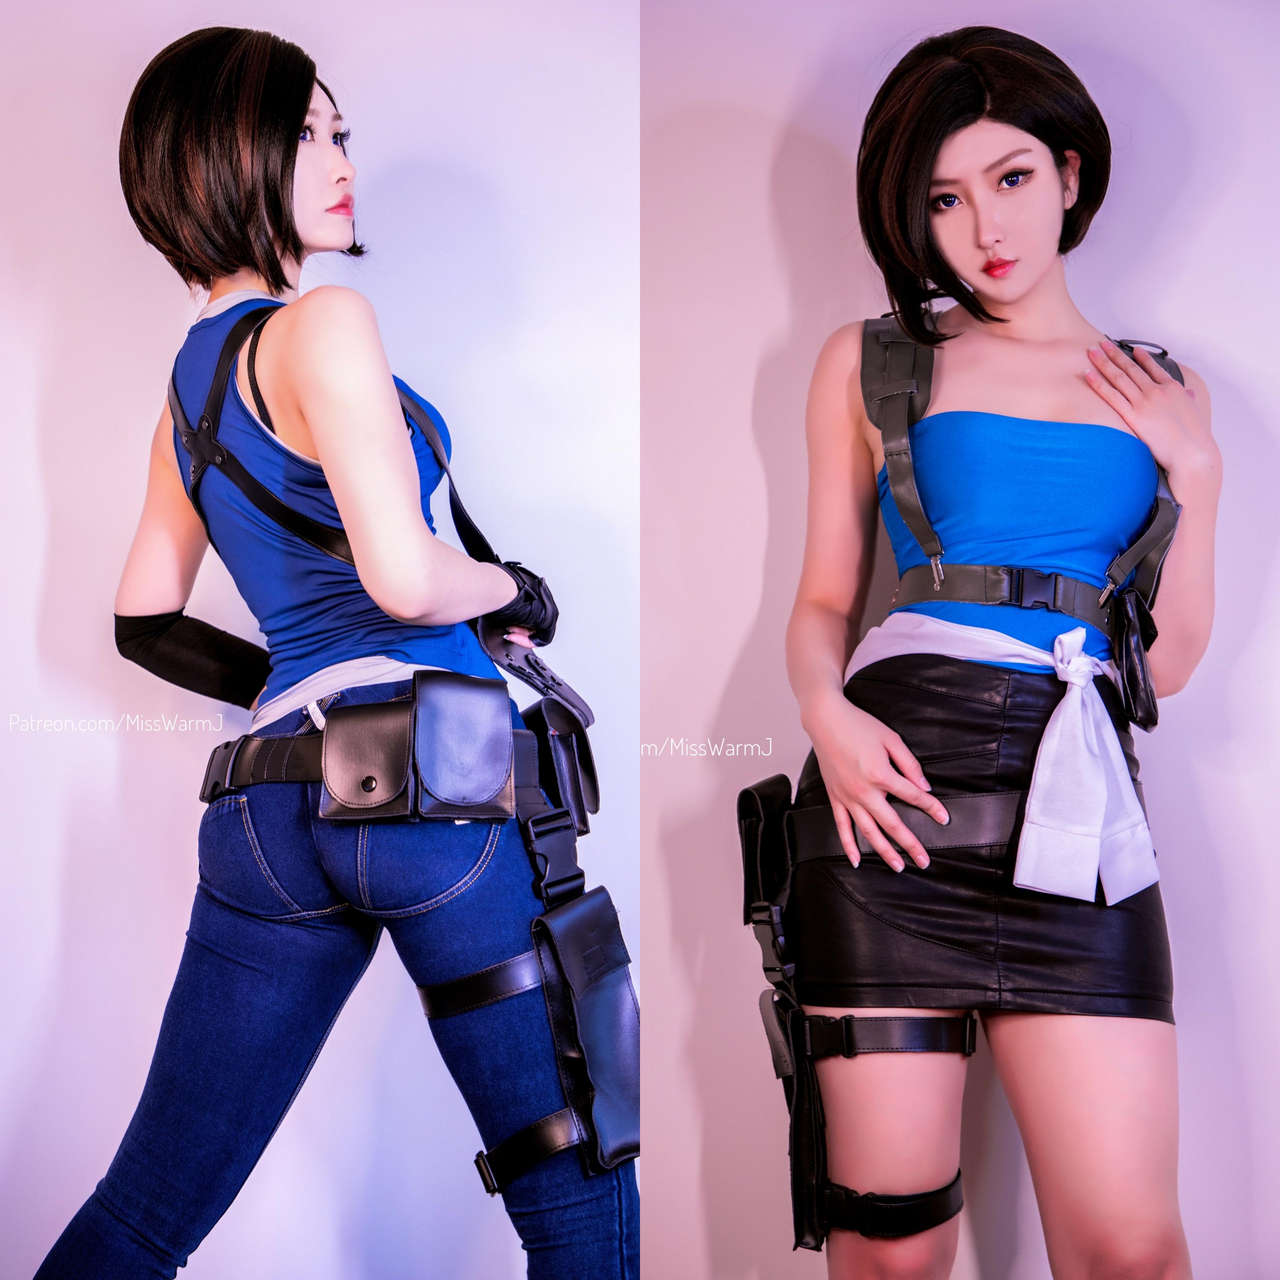 Both Versions Jill Valentine From Resident Evil 3 Remake By Misswarm